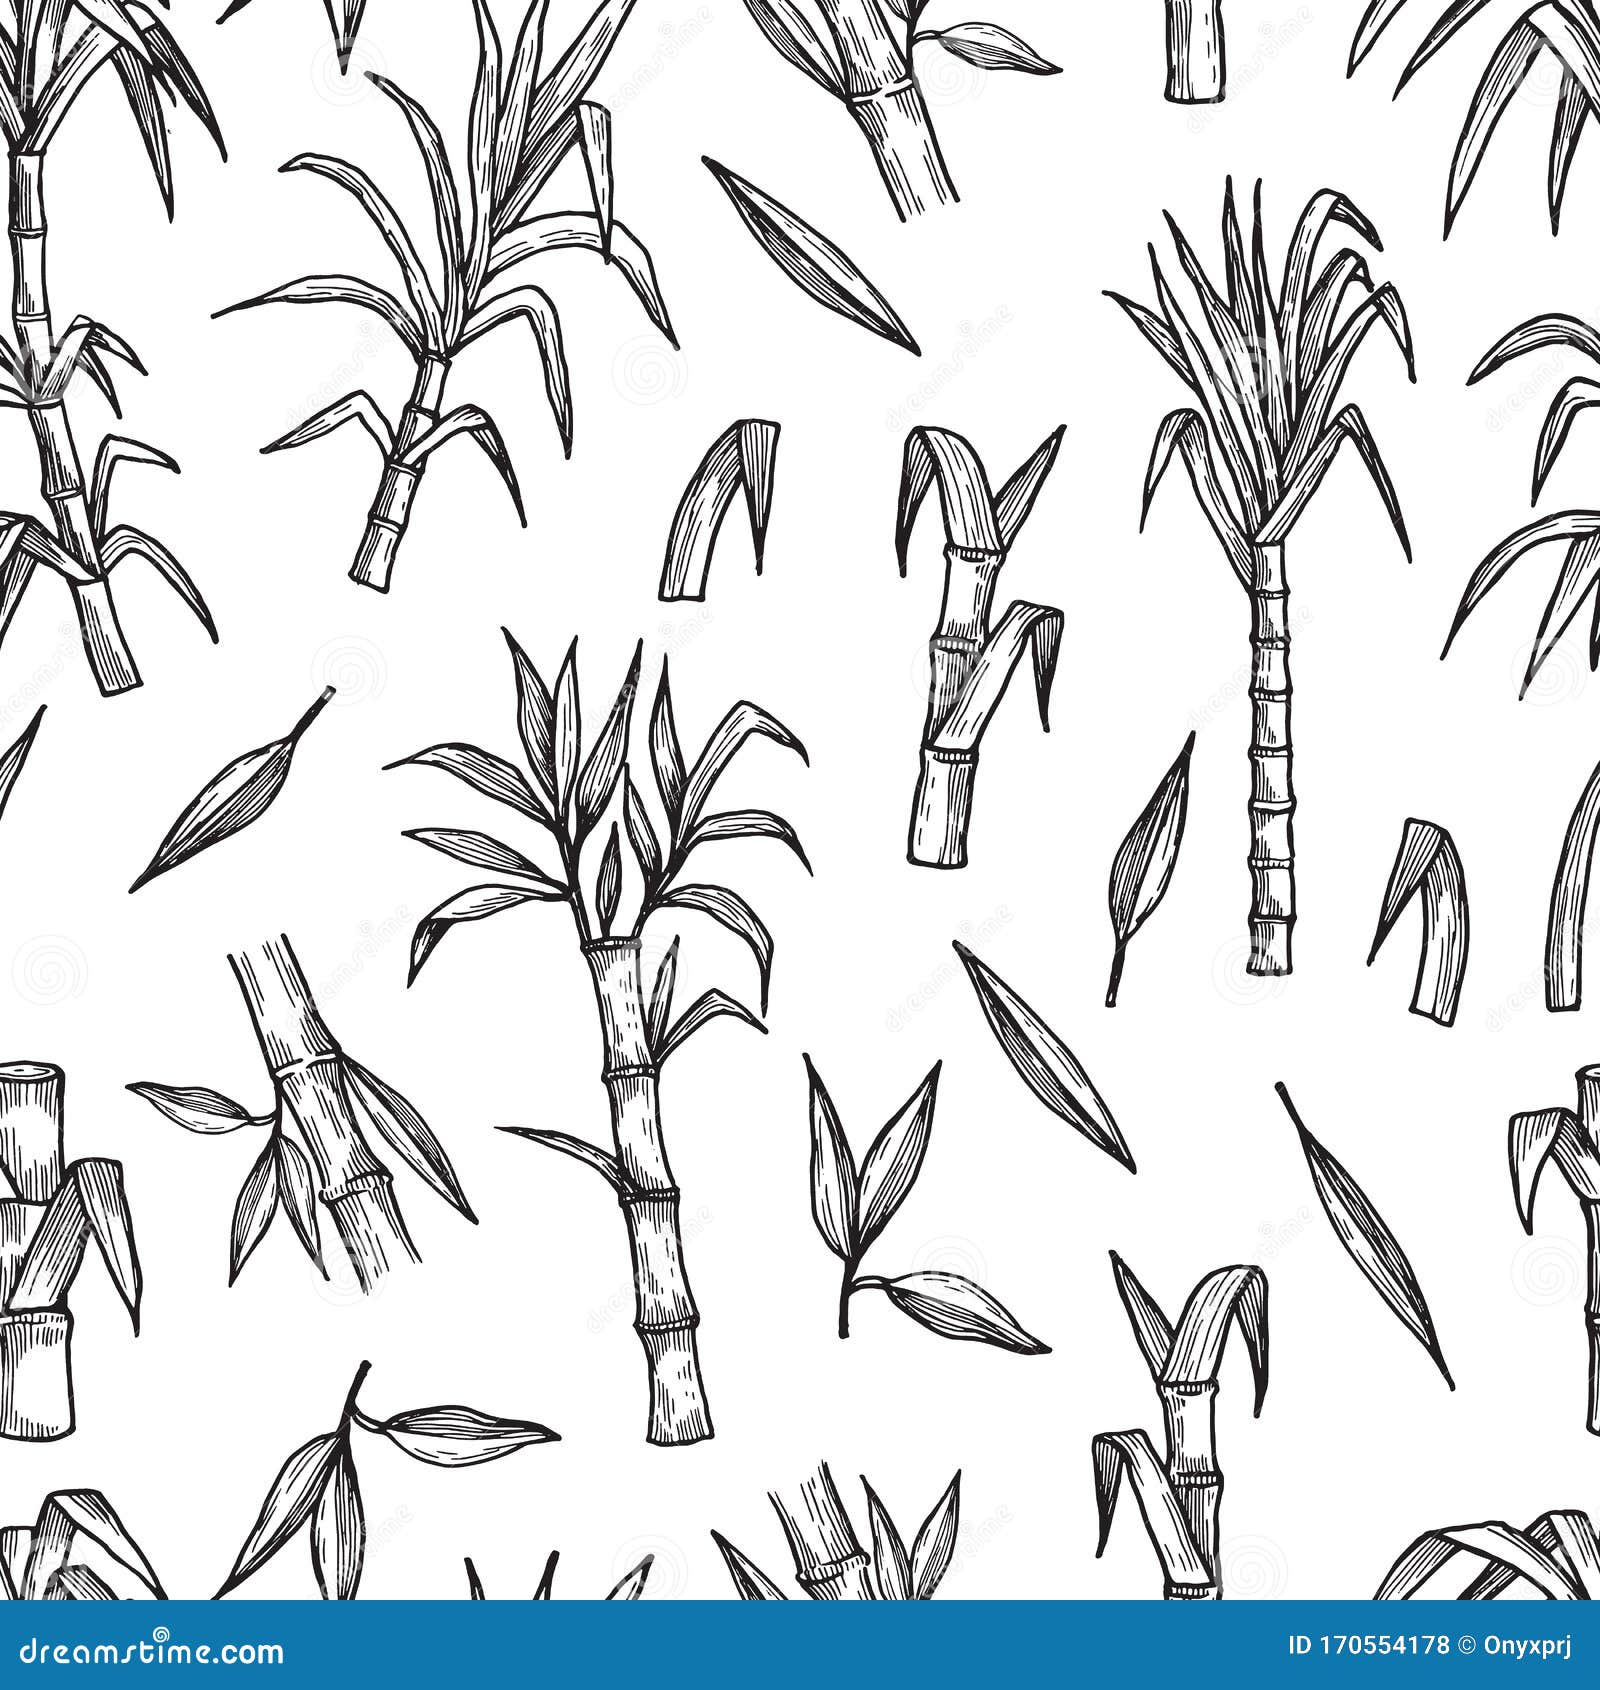 sugar plant seamless pattern. hand drawn sugarcane  background. agriculture production sketch texture